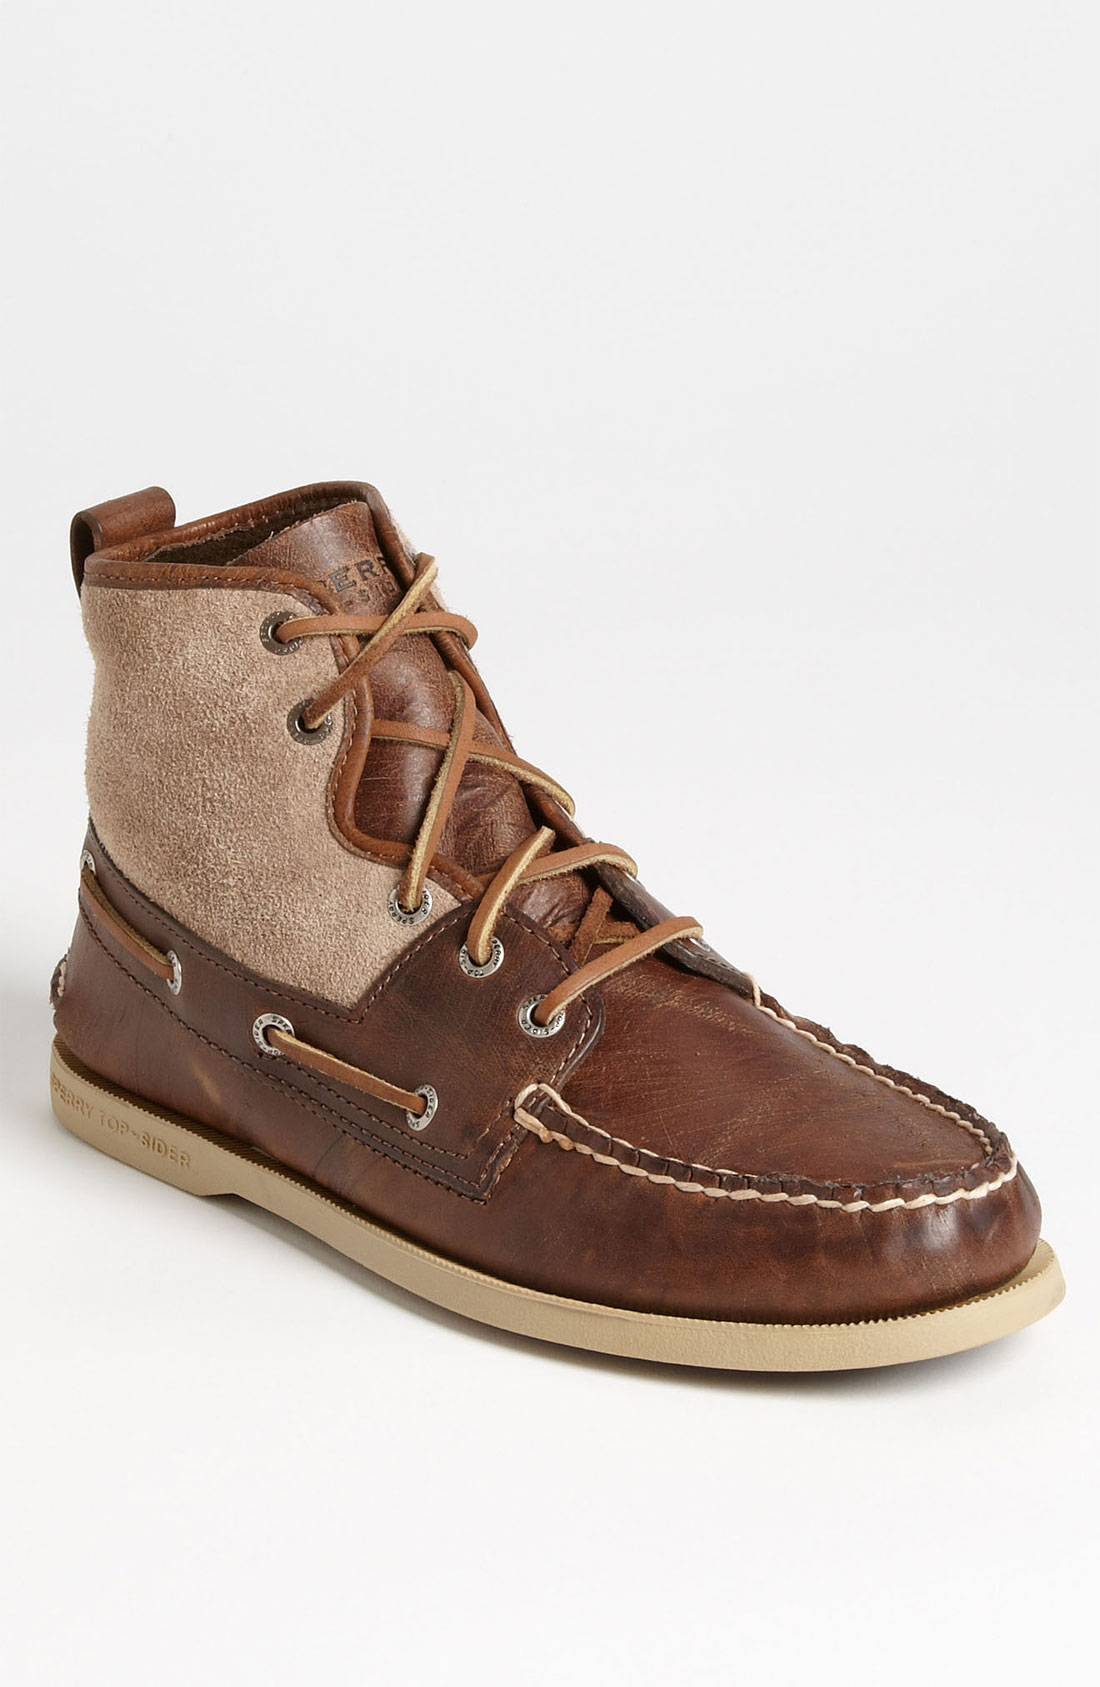 Sperry Top-sider Authentic Original Sport Moc Toe Boot in Brown for Men ...